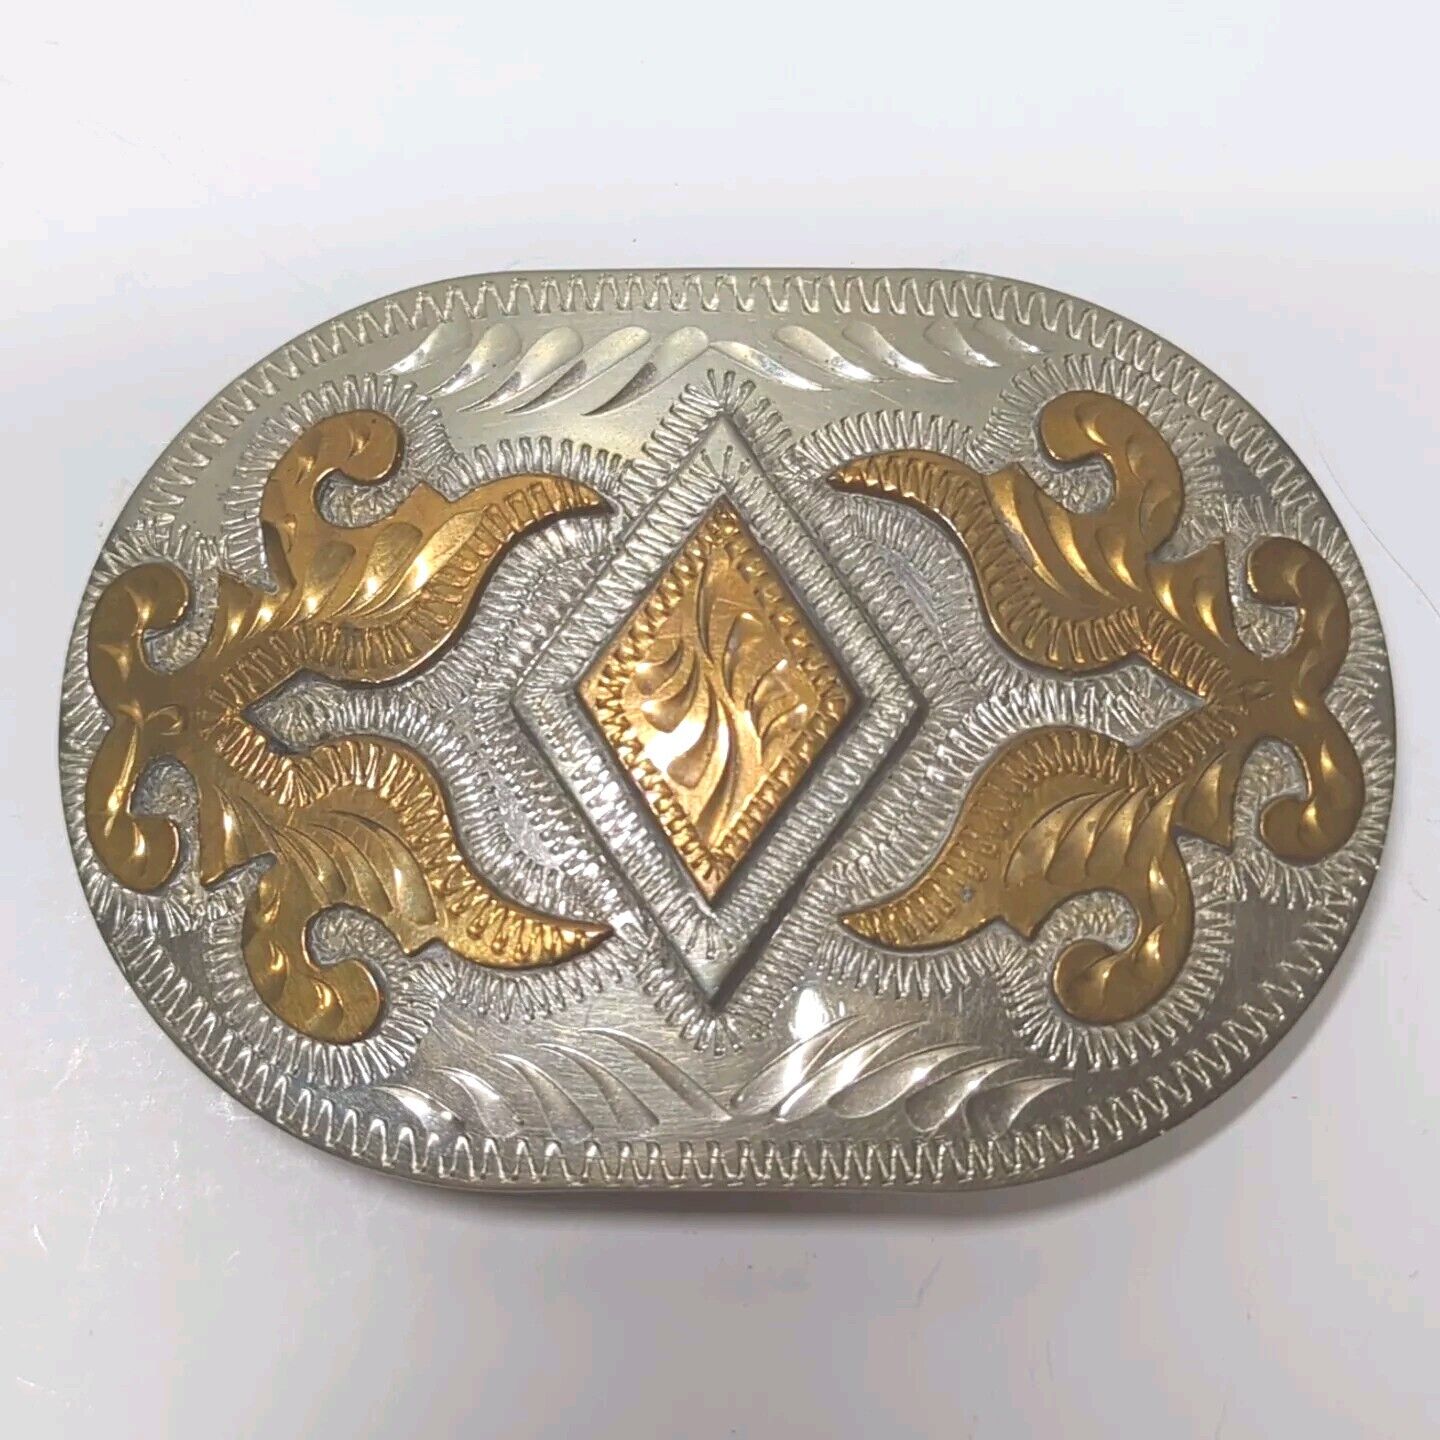 Vtg Western Flair Belt Buckle Mixed Metal Gold And Silver Tone Hand Crafted USA